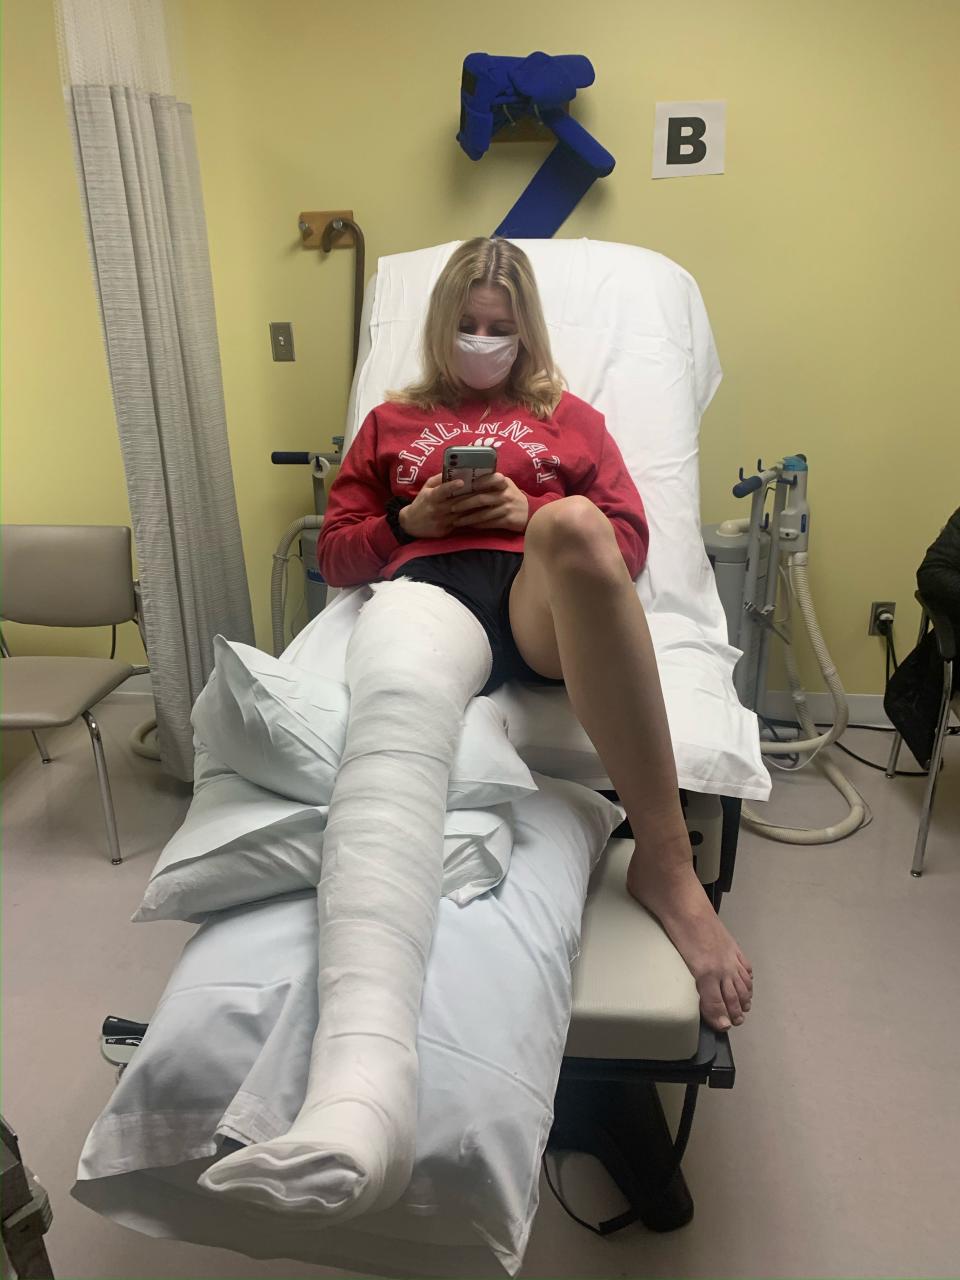 Cassidy Trem on March 16, 2021 after treatment for the accident.